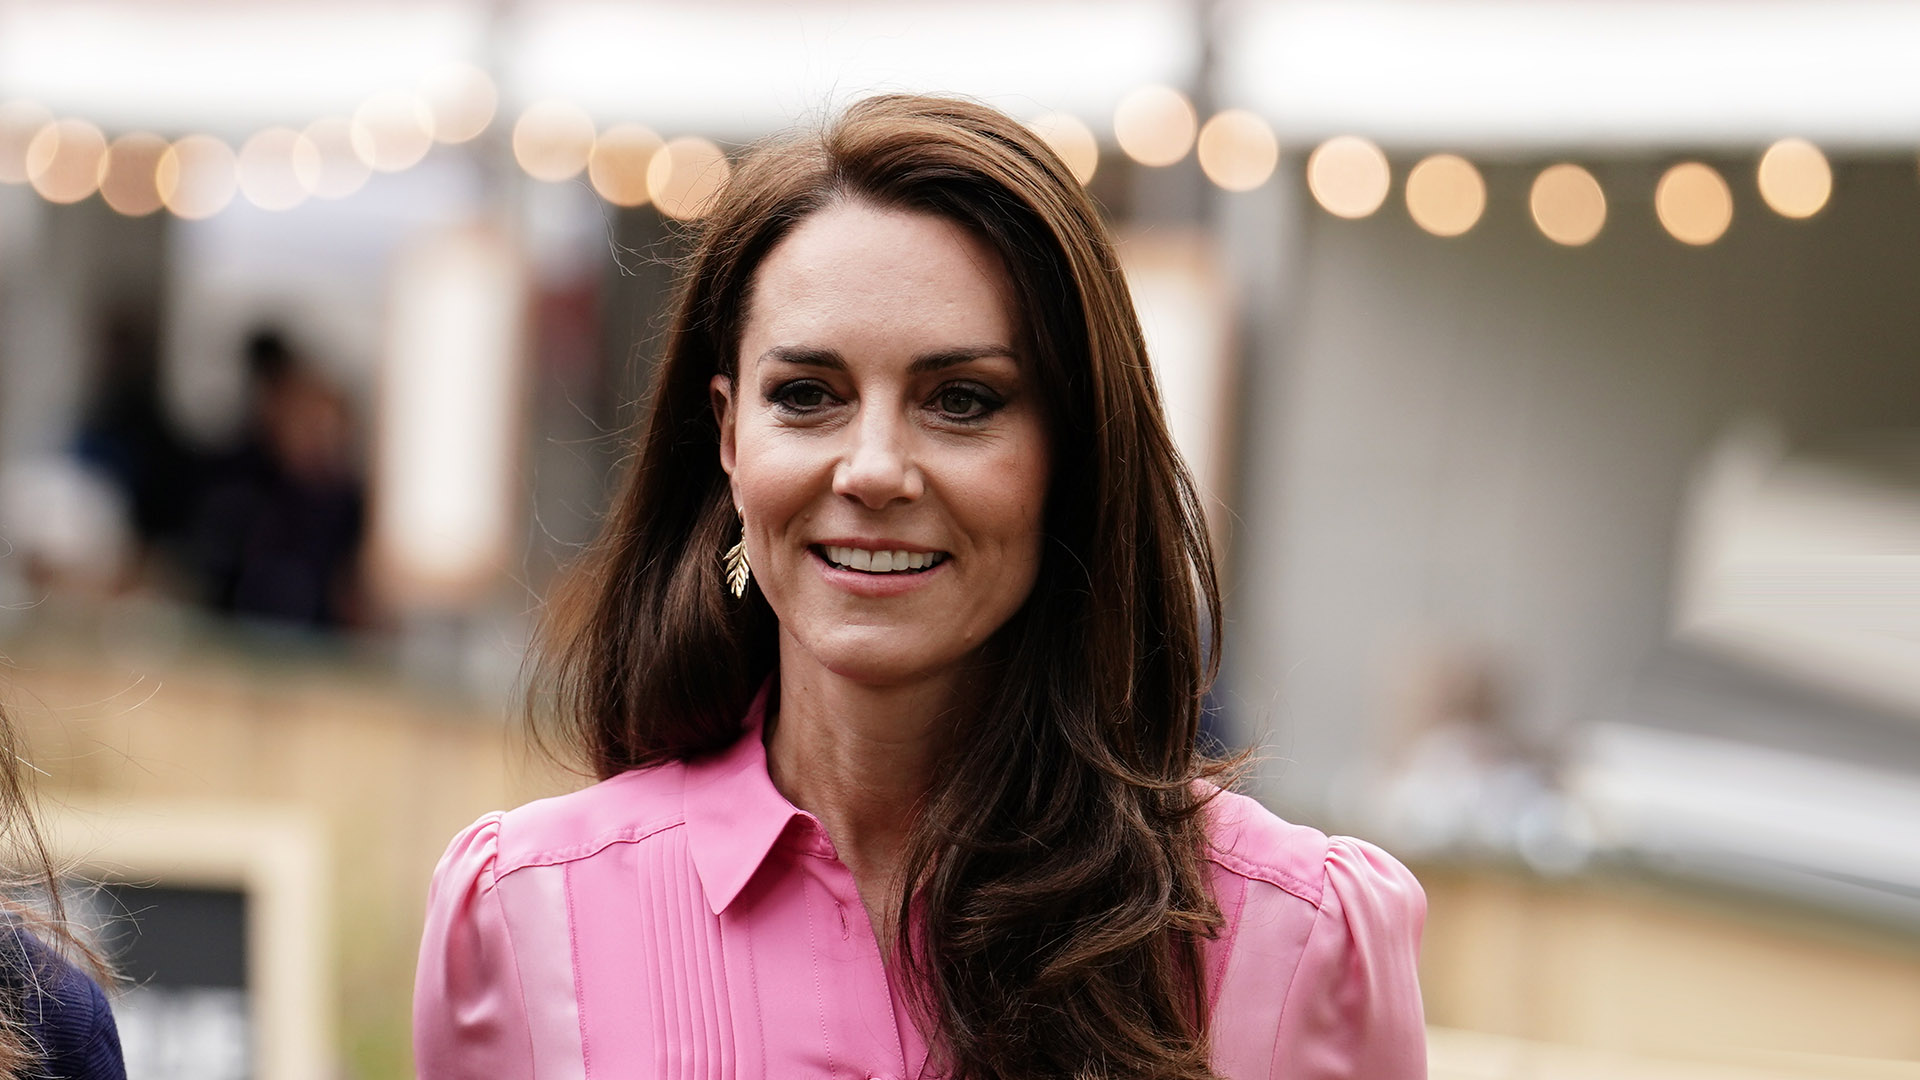 Catherine or Kate Middleton: What's the Princess of Wales' True Name?